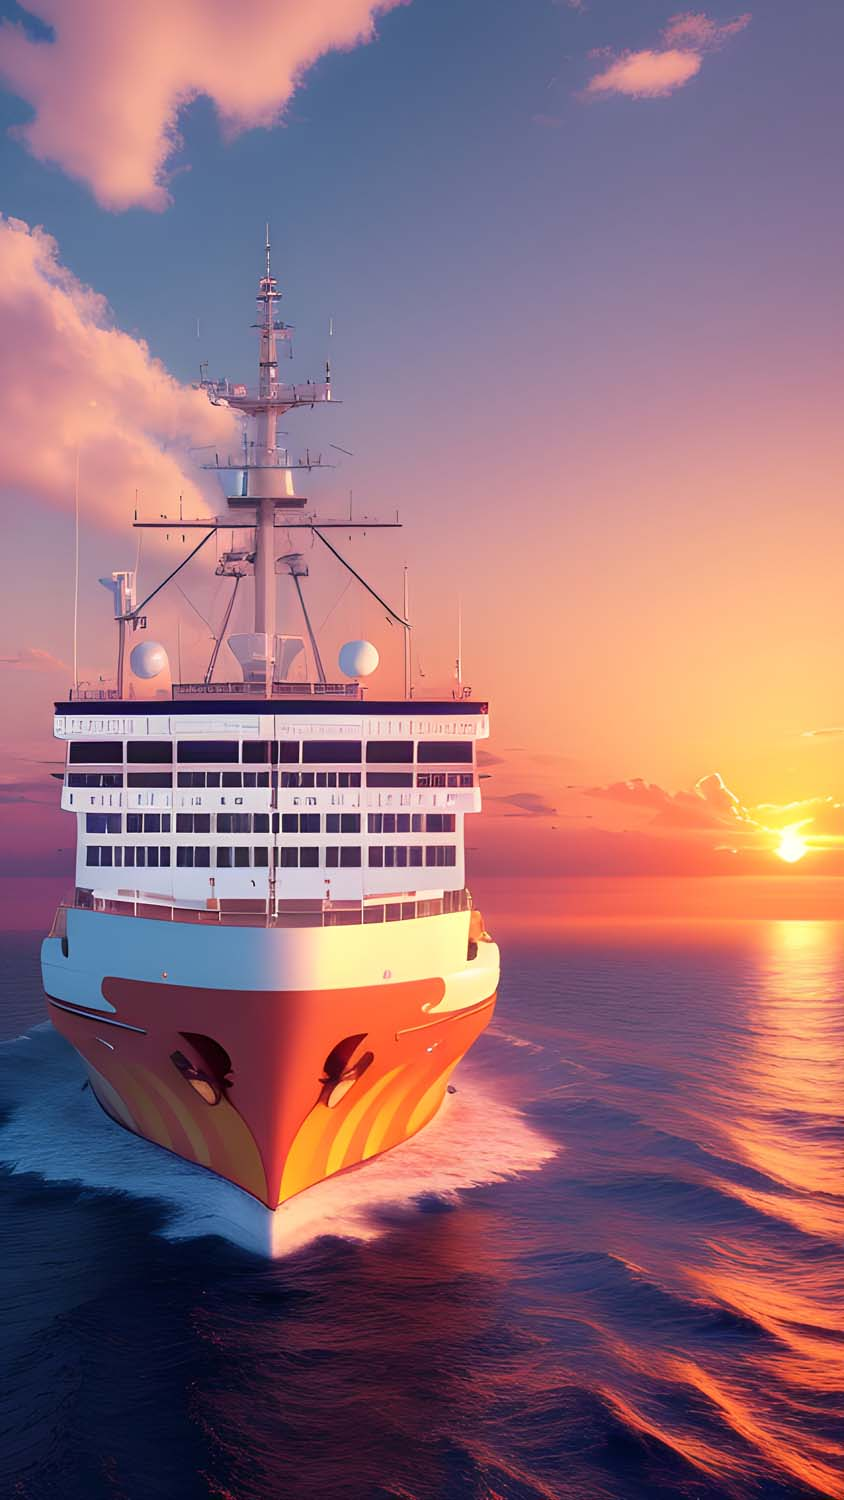 Cruise Ship IPhone Wallpaper 4K  IPhone Wallpapers